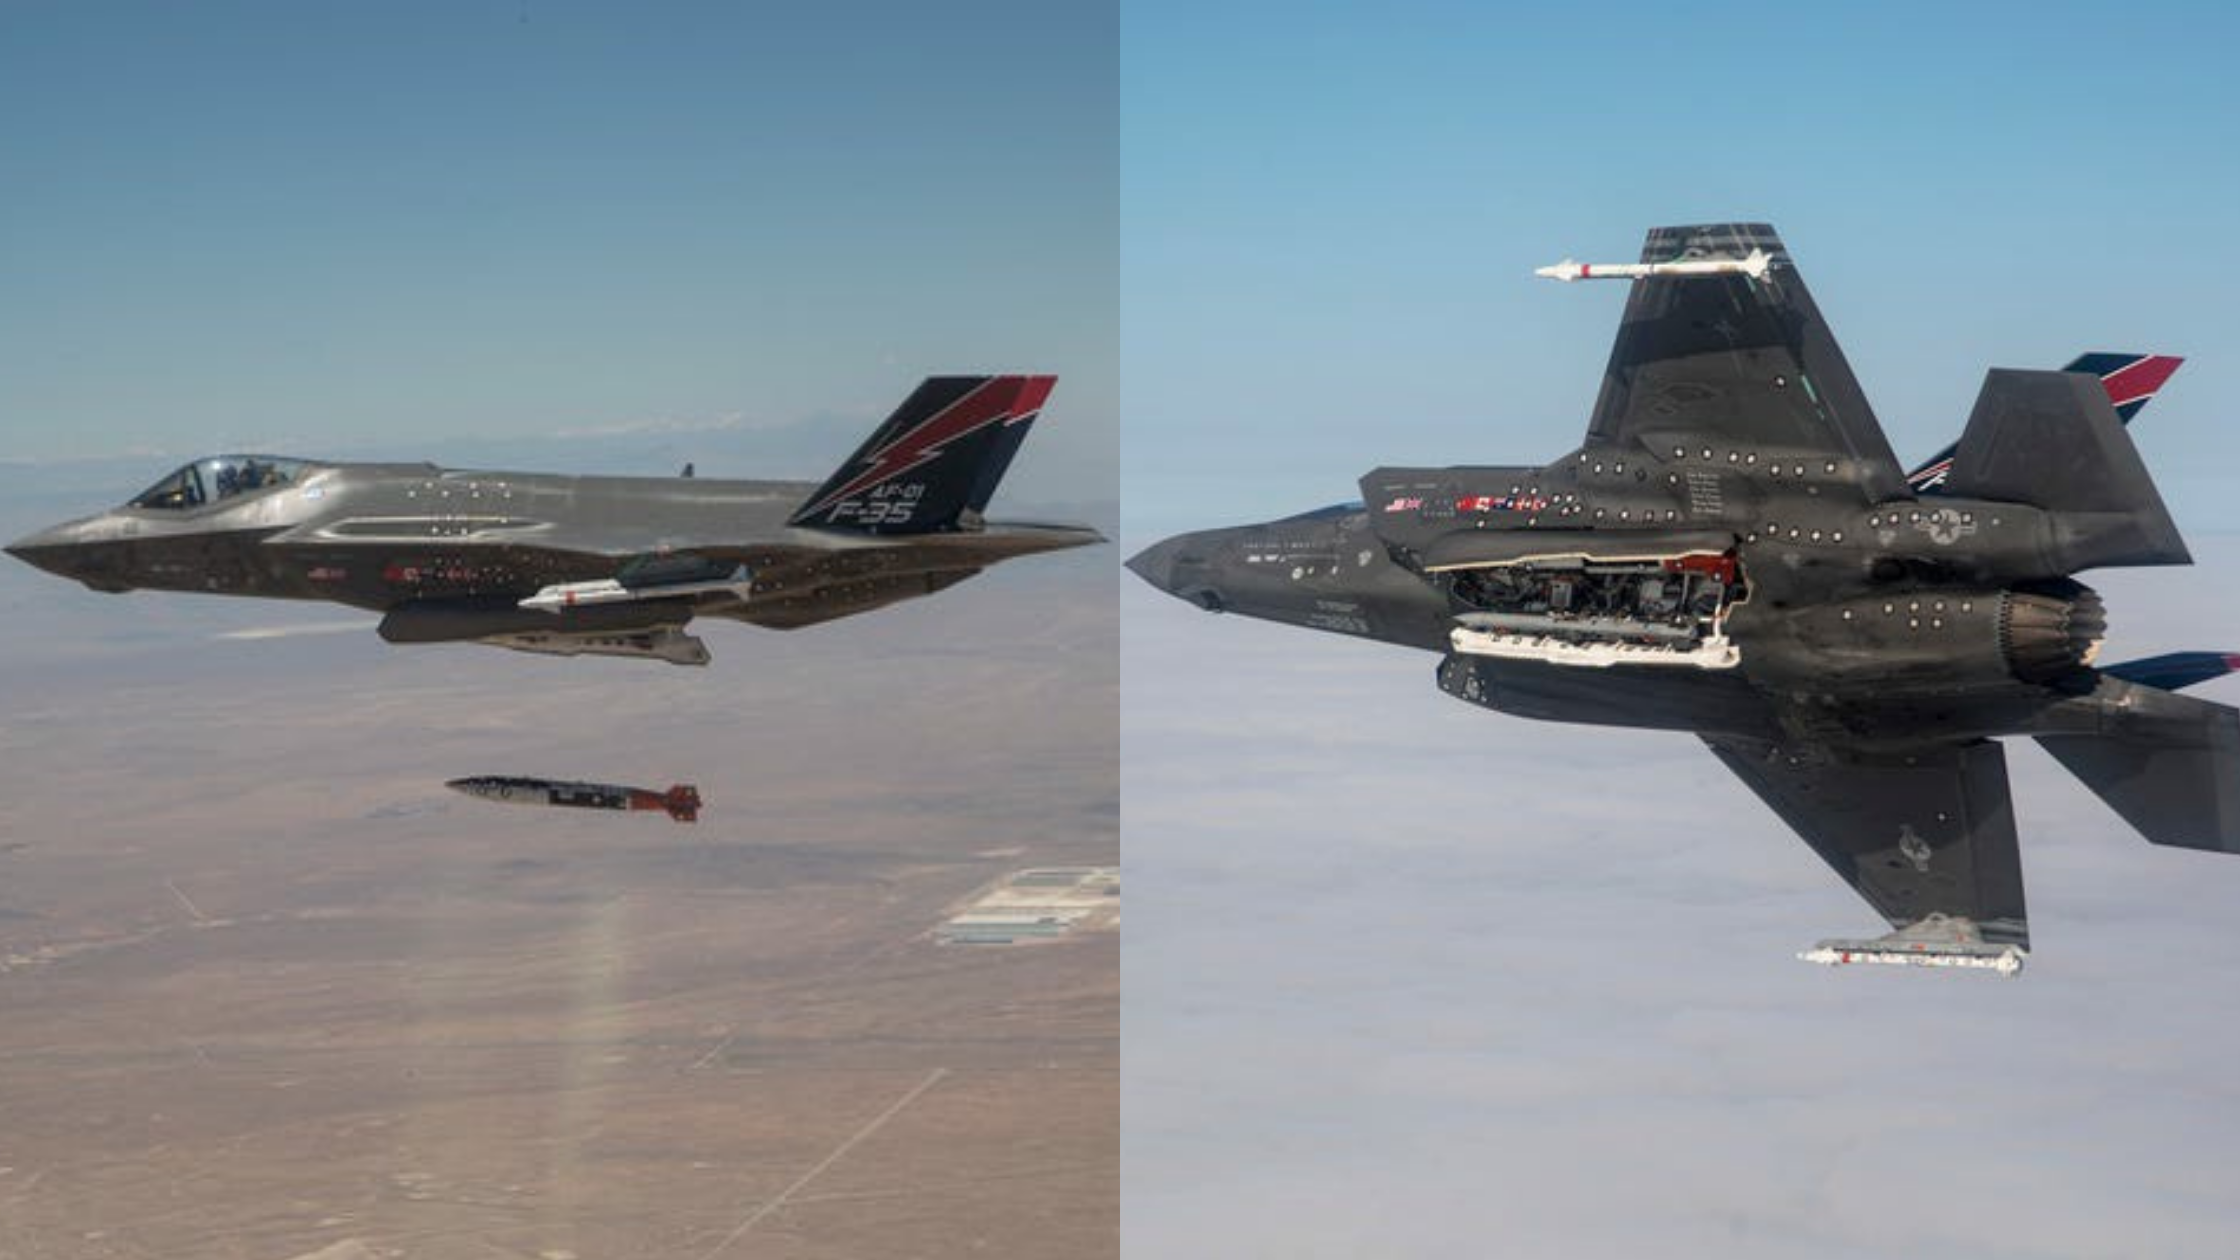 The First Images Of The Inert Nuclear Bombs Dropped By The F-35A During Testing